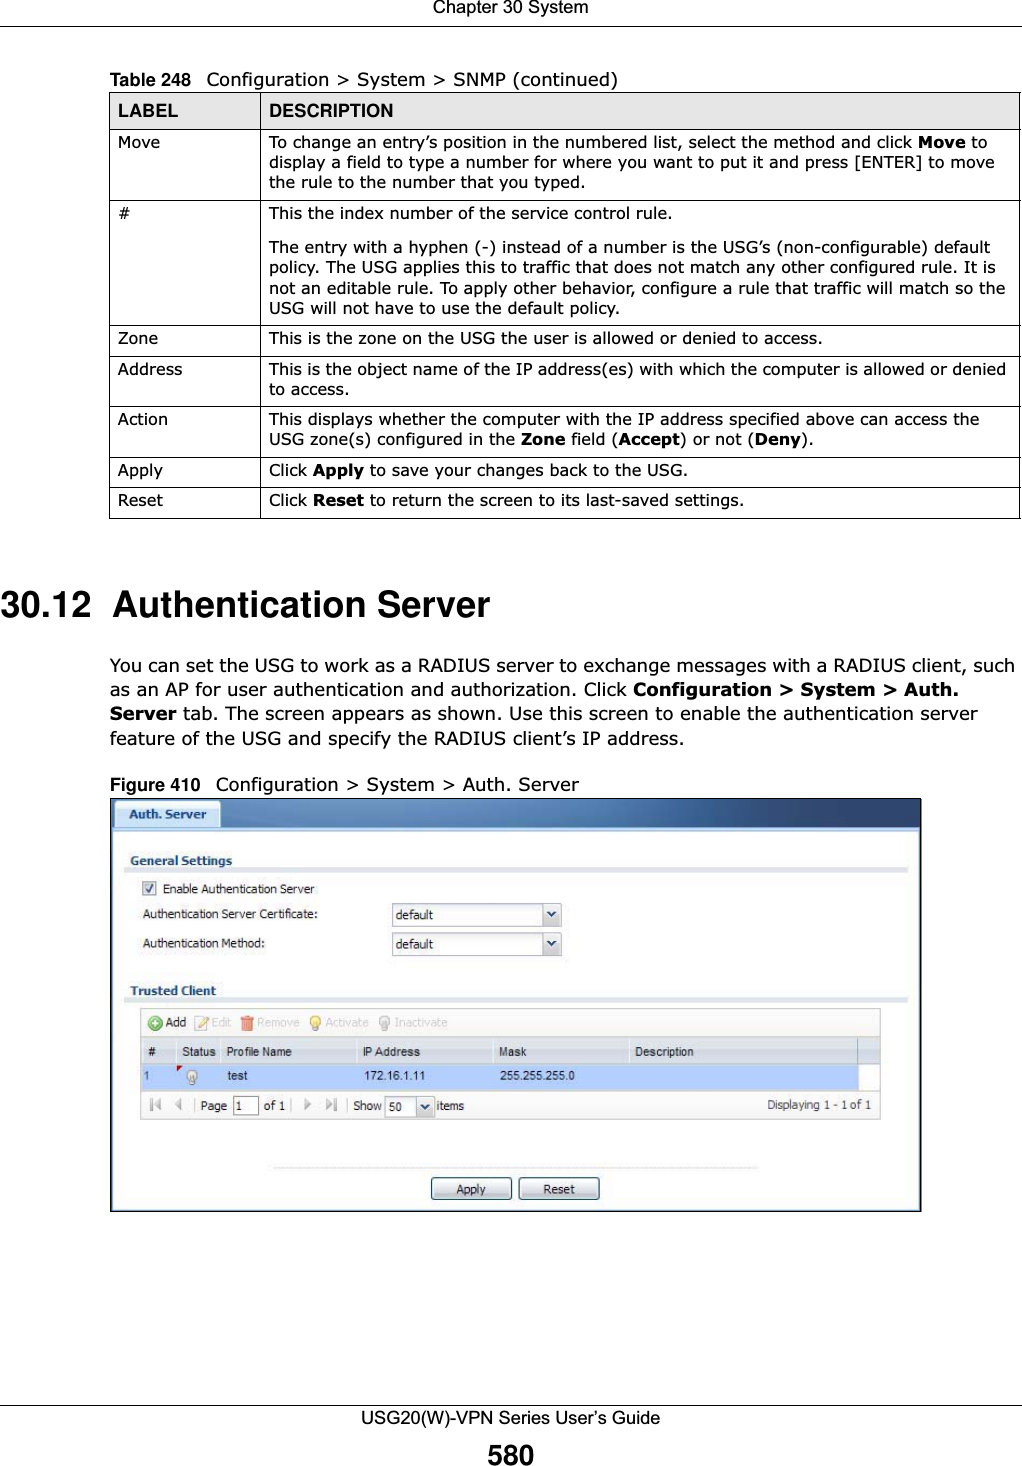 Chapter 30 SystemUSG20(W)-VPN Series User’s Guide58030.12  Authentication ServerYou can set the USG to work as a RADIUS server to exchange messages with a RADIUS client, such as an AP for user authentication and authorization. Click Configuration &gt; System &gt; Auth. Server tab. The screen appears as shown. Use this screen to enable the authentication server feature of the USG and specify the RADIUS client’s IP address.Figure 410   Configuration &gt; System &gt; Auth. ServerMove To change an entry’s position in the numbered list, select the method and click Move to display a field to type a number for where you want to put it and press [ENTER] to move the rule to the number that you typed.#This the index number of the service control rule.The entry with a hyphen (-) instead of a number is the USG’s (non-configurable) default policy. The USG applies this to traffic that does not match any other configured rule. It is not an editable rule. To apply other behavior, configure a rule that traffic will match so the USG will not have to use the default policy.Zone This is the zone on the USG the user is allowed or denied to access.Address This is the object name of the IP address(es) with which the computer is allowed or denied to access.Action This displays whether the computer with the IP address specified above can access the USG zone(s) configured in the Zone field (Accept) or not (Deny).Apply Click Apply to save your changes back to the USG. Reset Click Reset to return the screen to its last-saved settings. Table 248   Configuration &gt; System &gt; SNMP (continued)LABEL DESCRIPTION